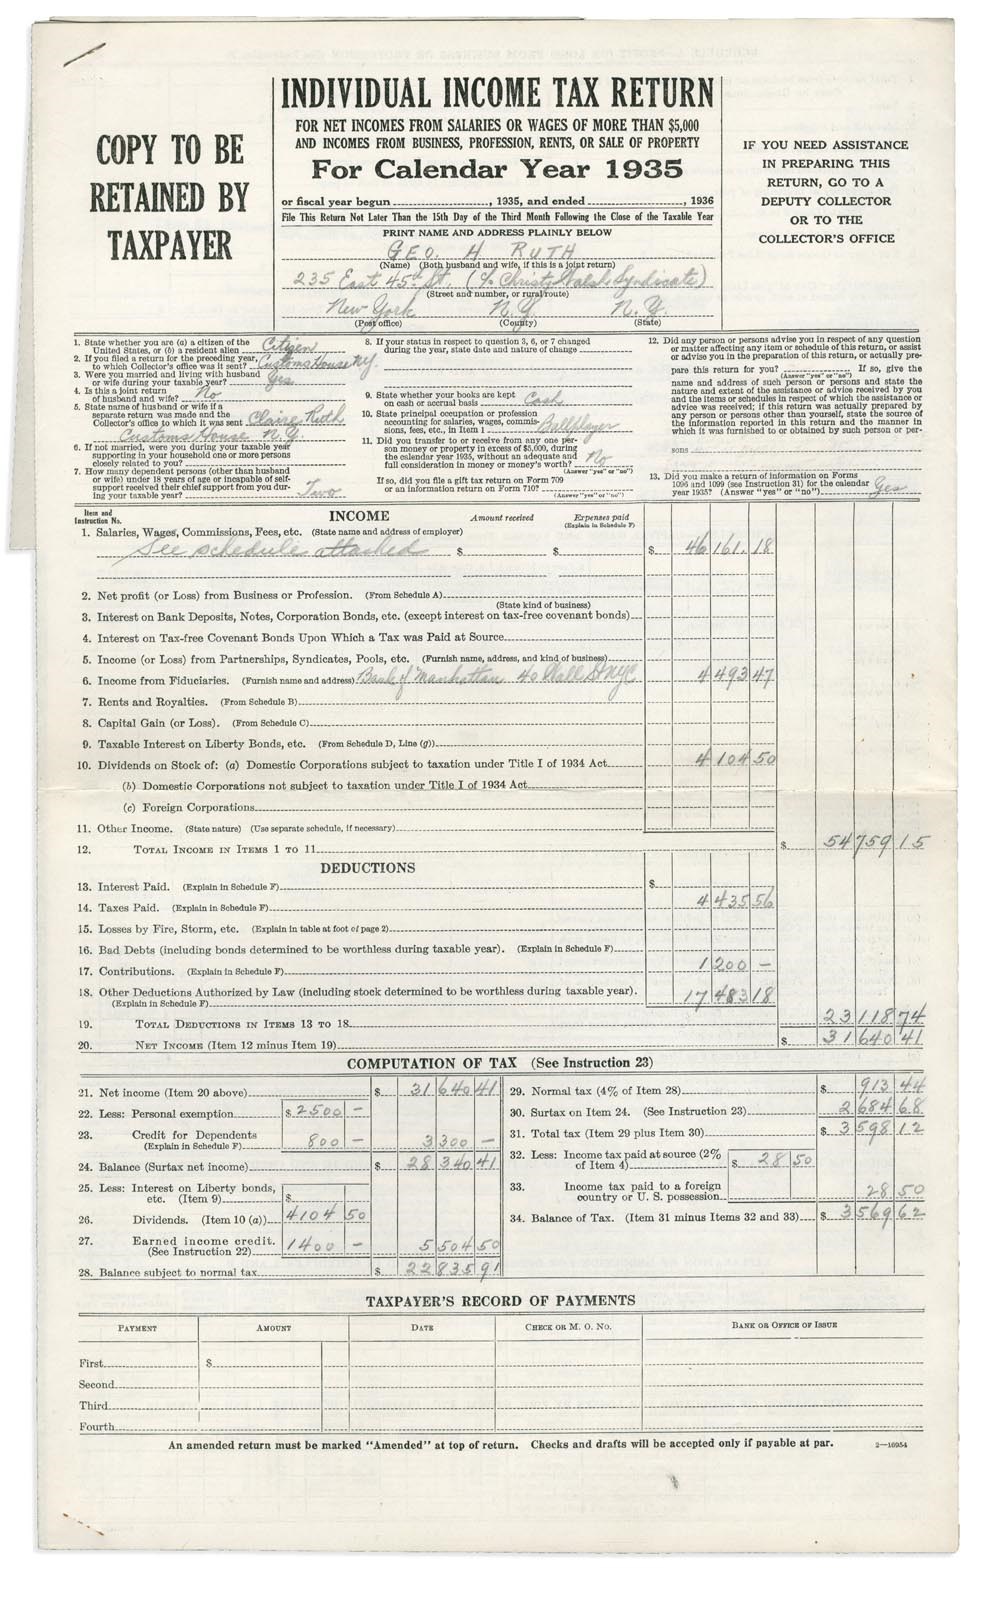 Collection Of Babe Ruth's Right Hand Man - 1935 Babe Ruth Federal Income Tax Return - His Final Year As A Player